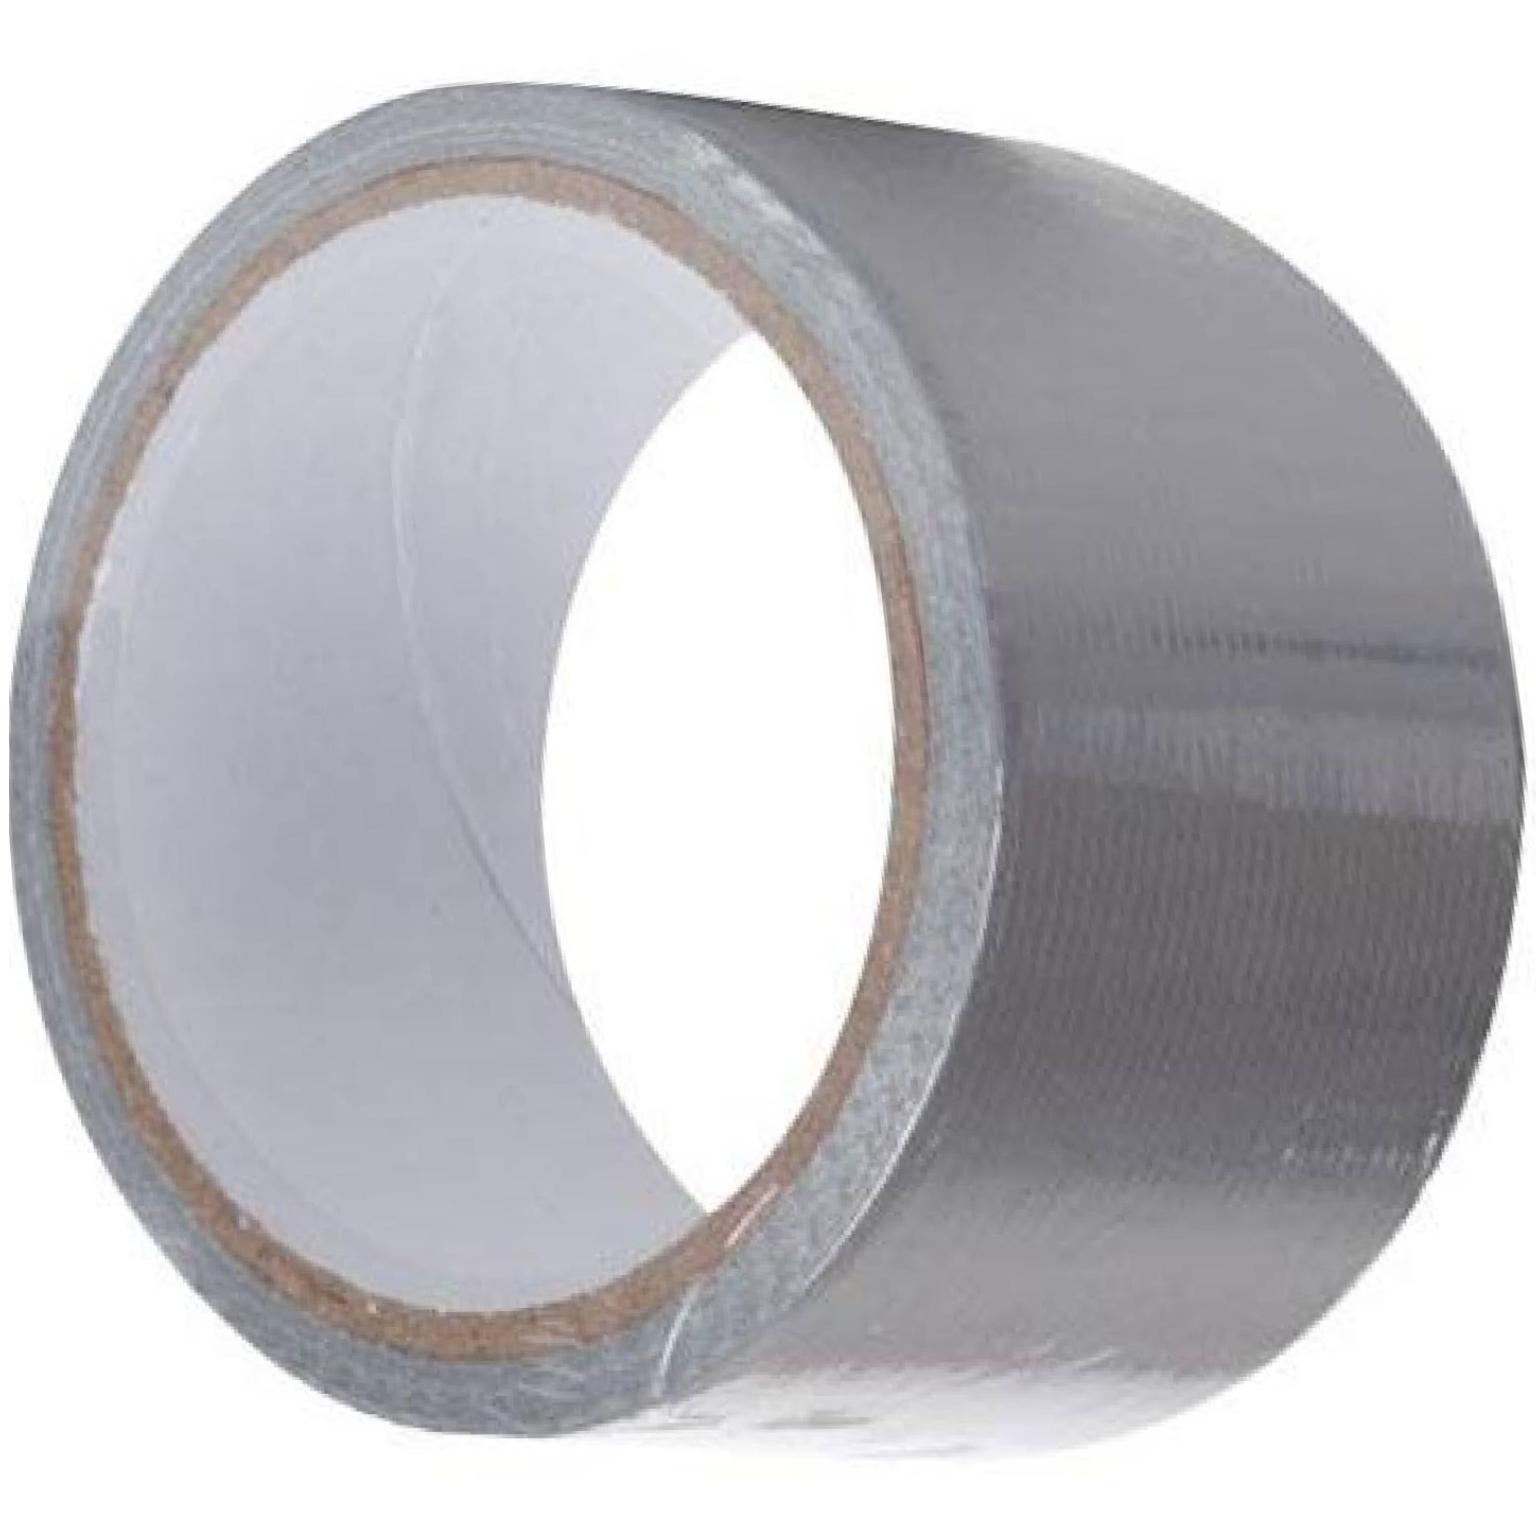 Image of Duct tape - Perel